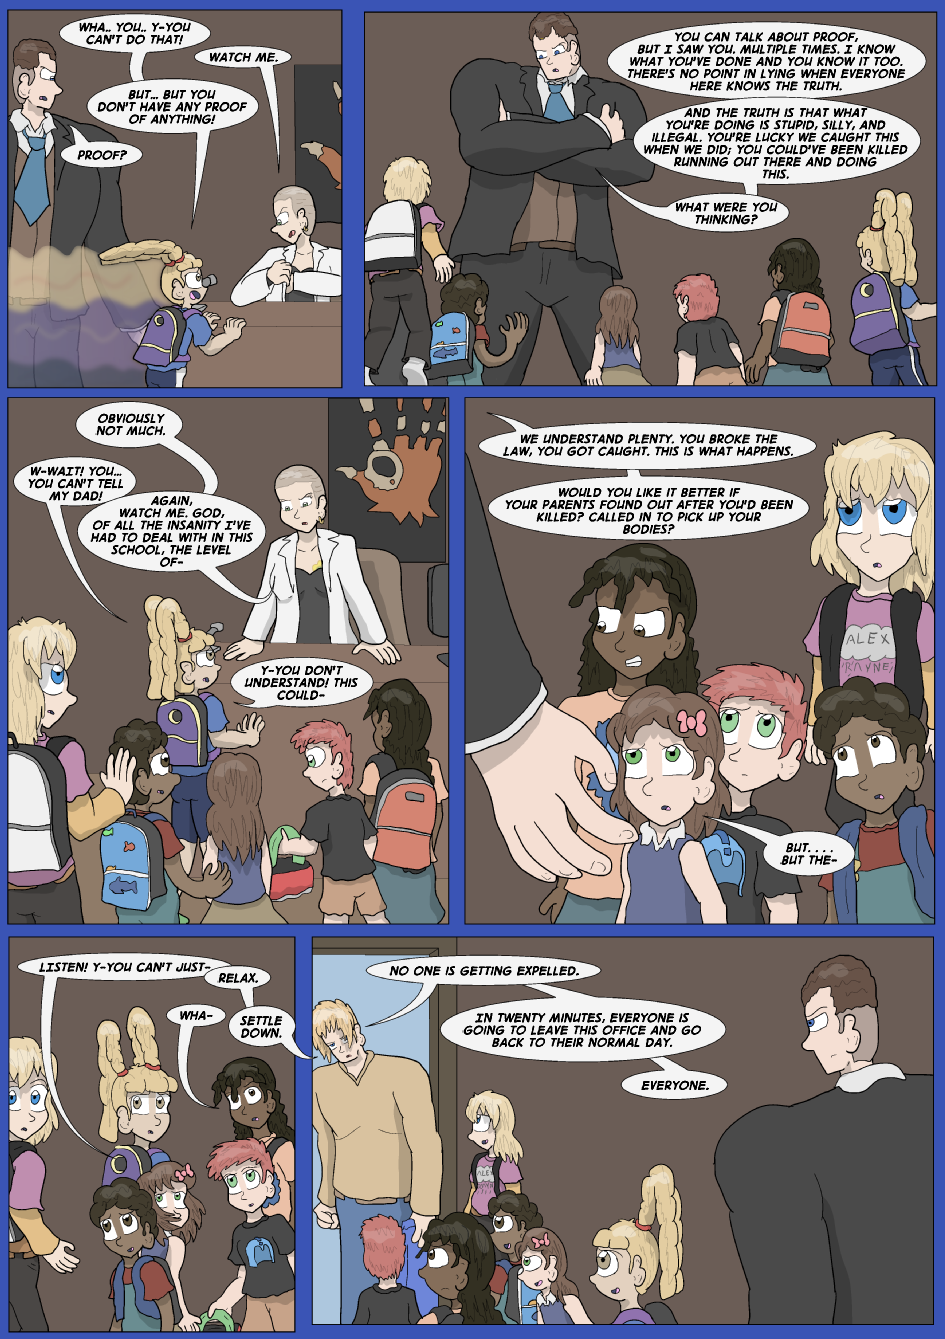 Showing Your Blue Colors- Page 5